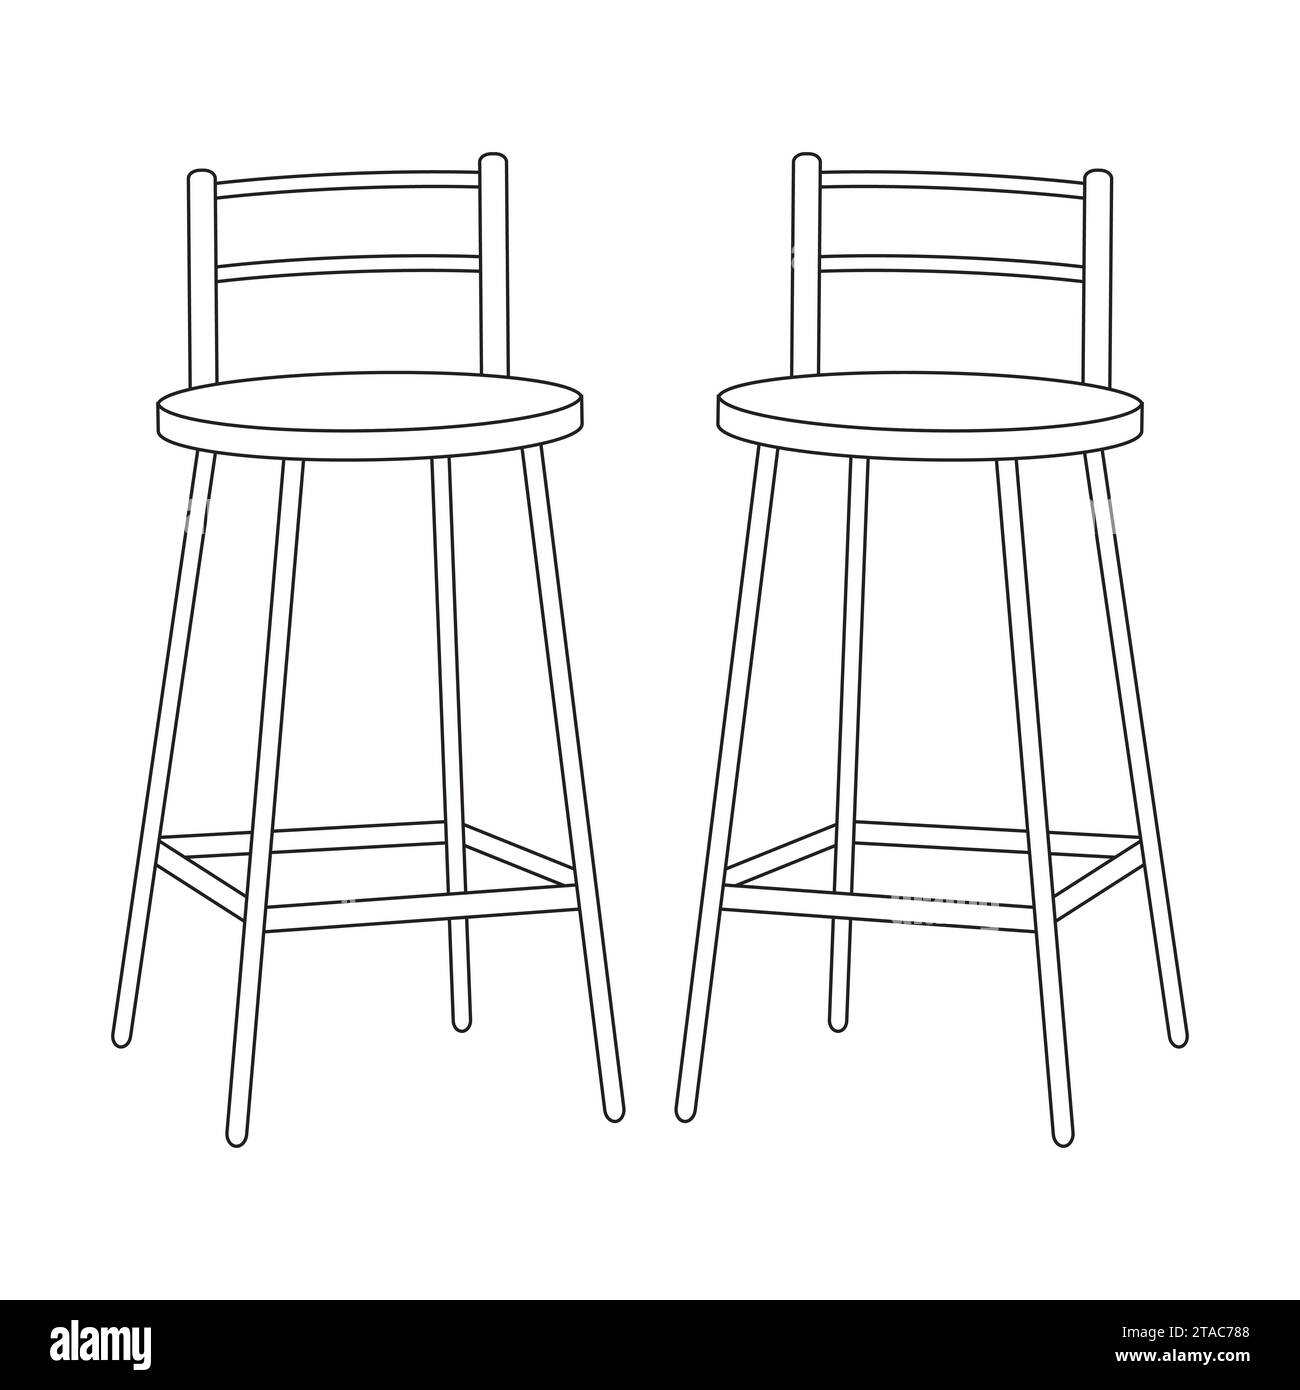 coloring page for kids. Bar stool, kitchen stool, Restaurant stool, Pub Stool coloring page. kitchen interior coloring page. coloring page book ban Stock Vector